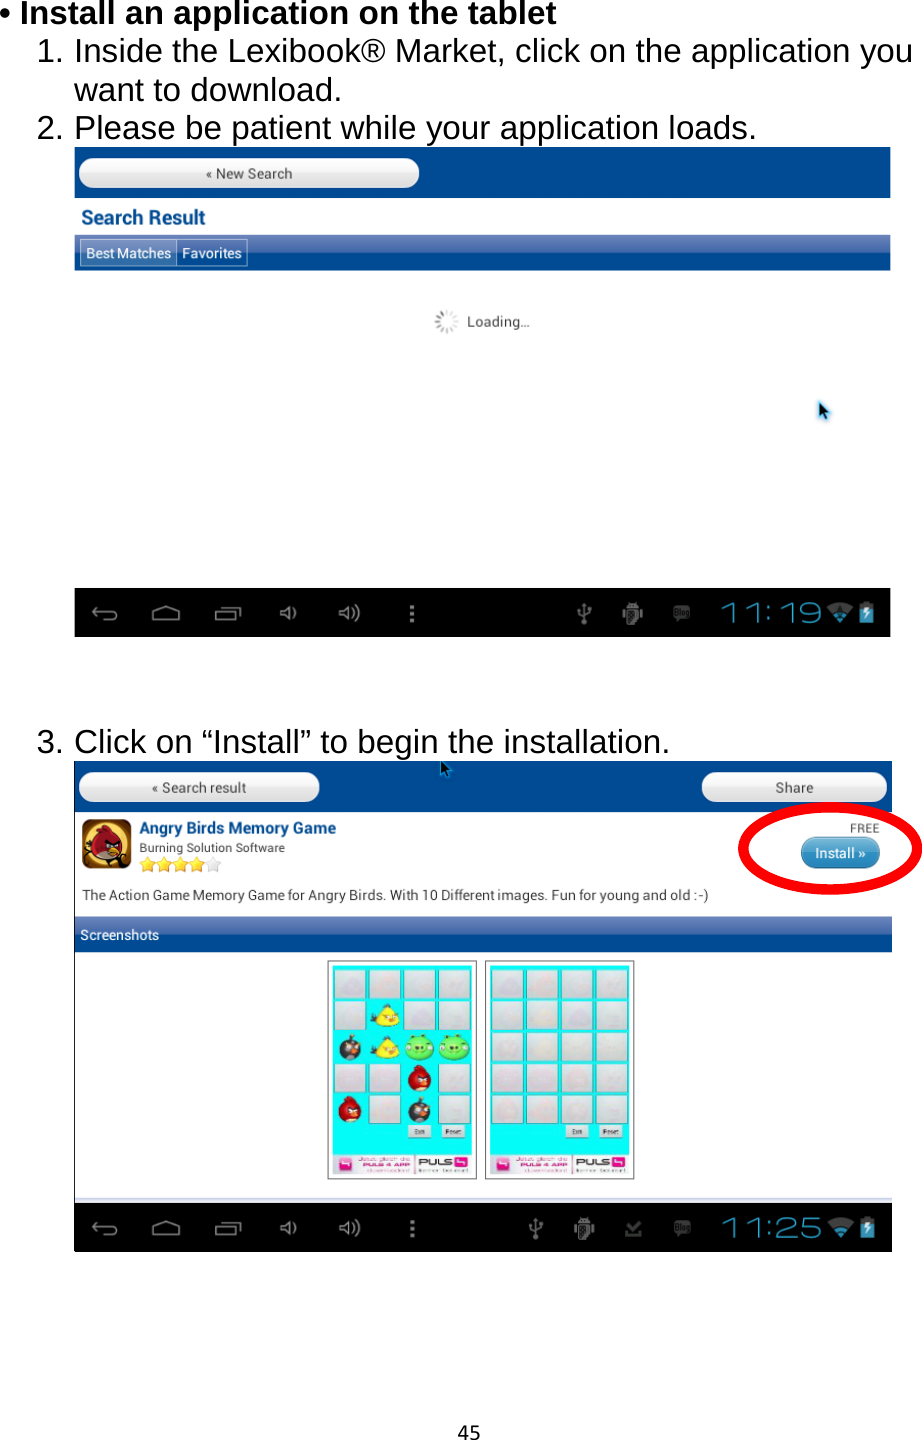 45  • Install an application on the tablet 1. Inside the Lexibook® Market, click on the application you want to download. 2. Please be patient while your application loads.     3. Click on “Install” to begin the installation.       